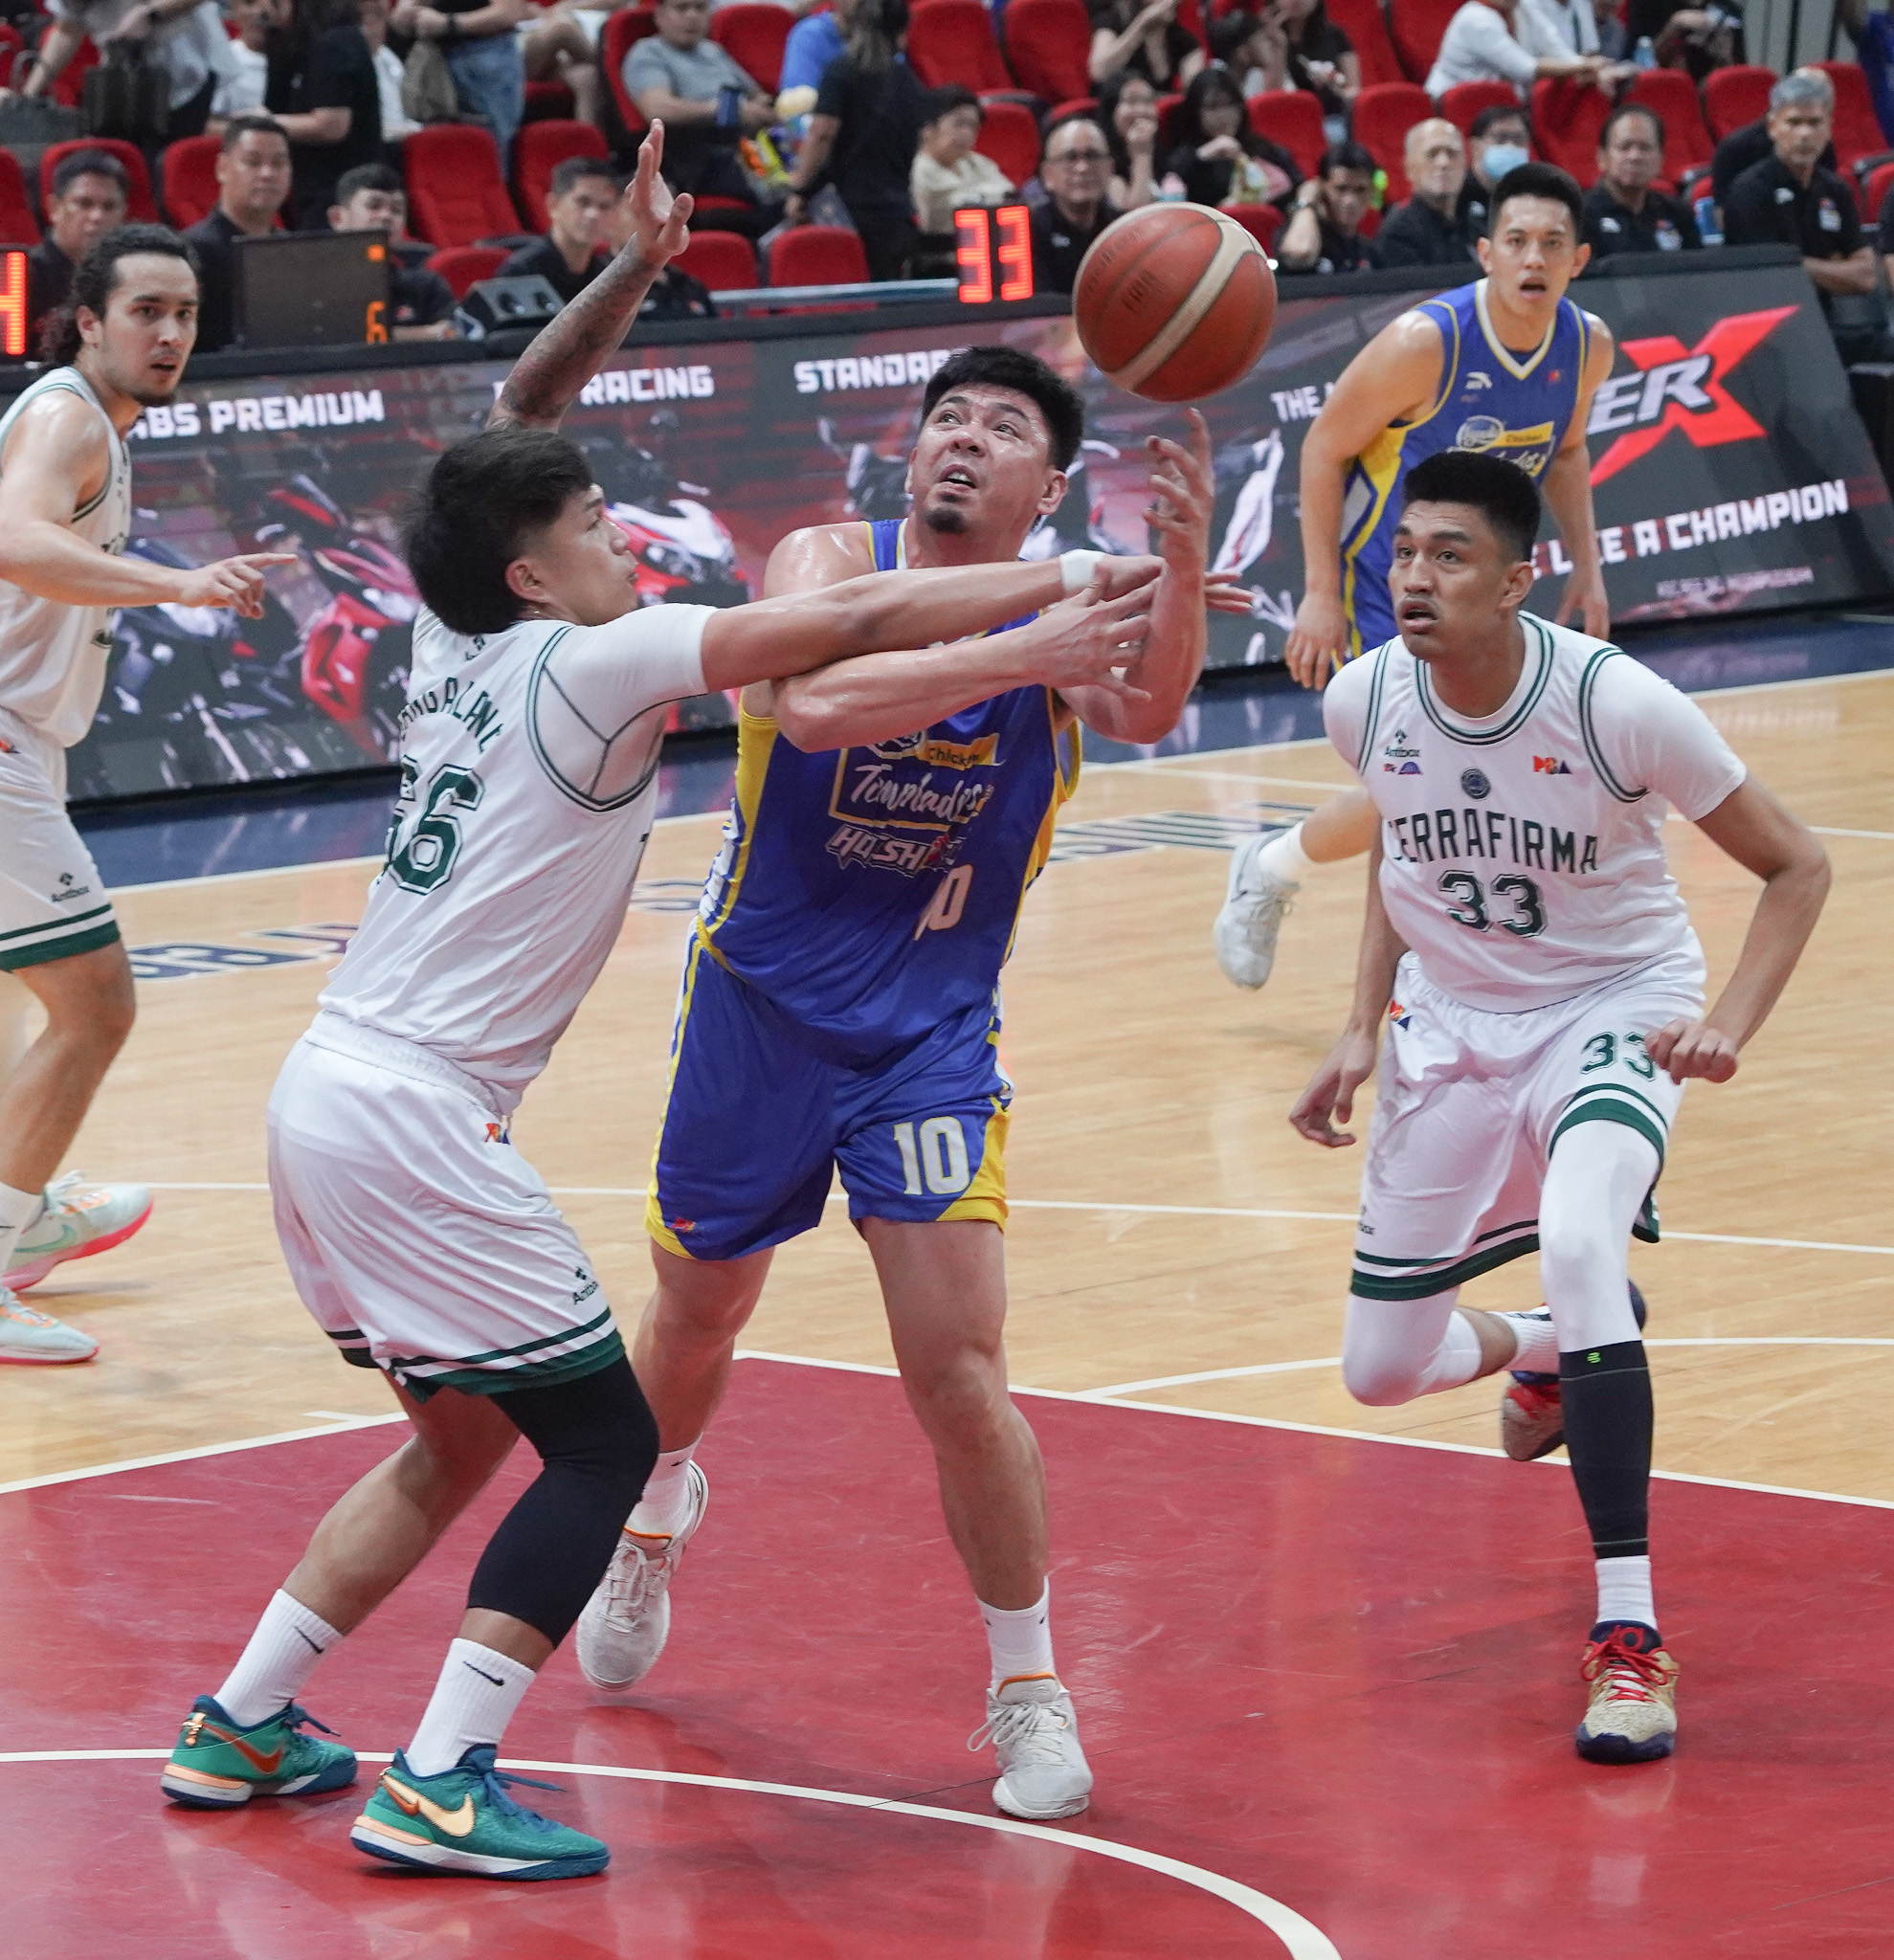 hotshots through to quarters, place dyip on playoff bubble